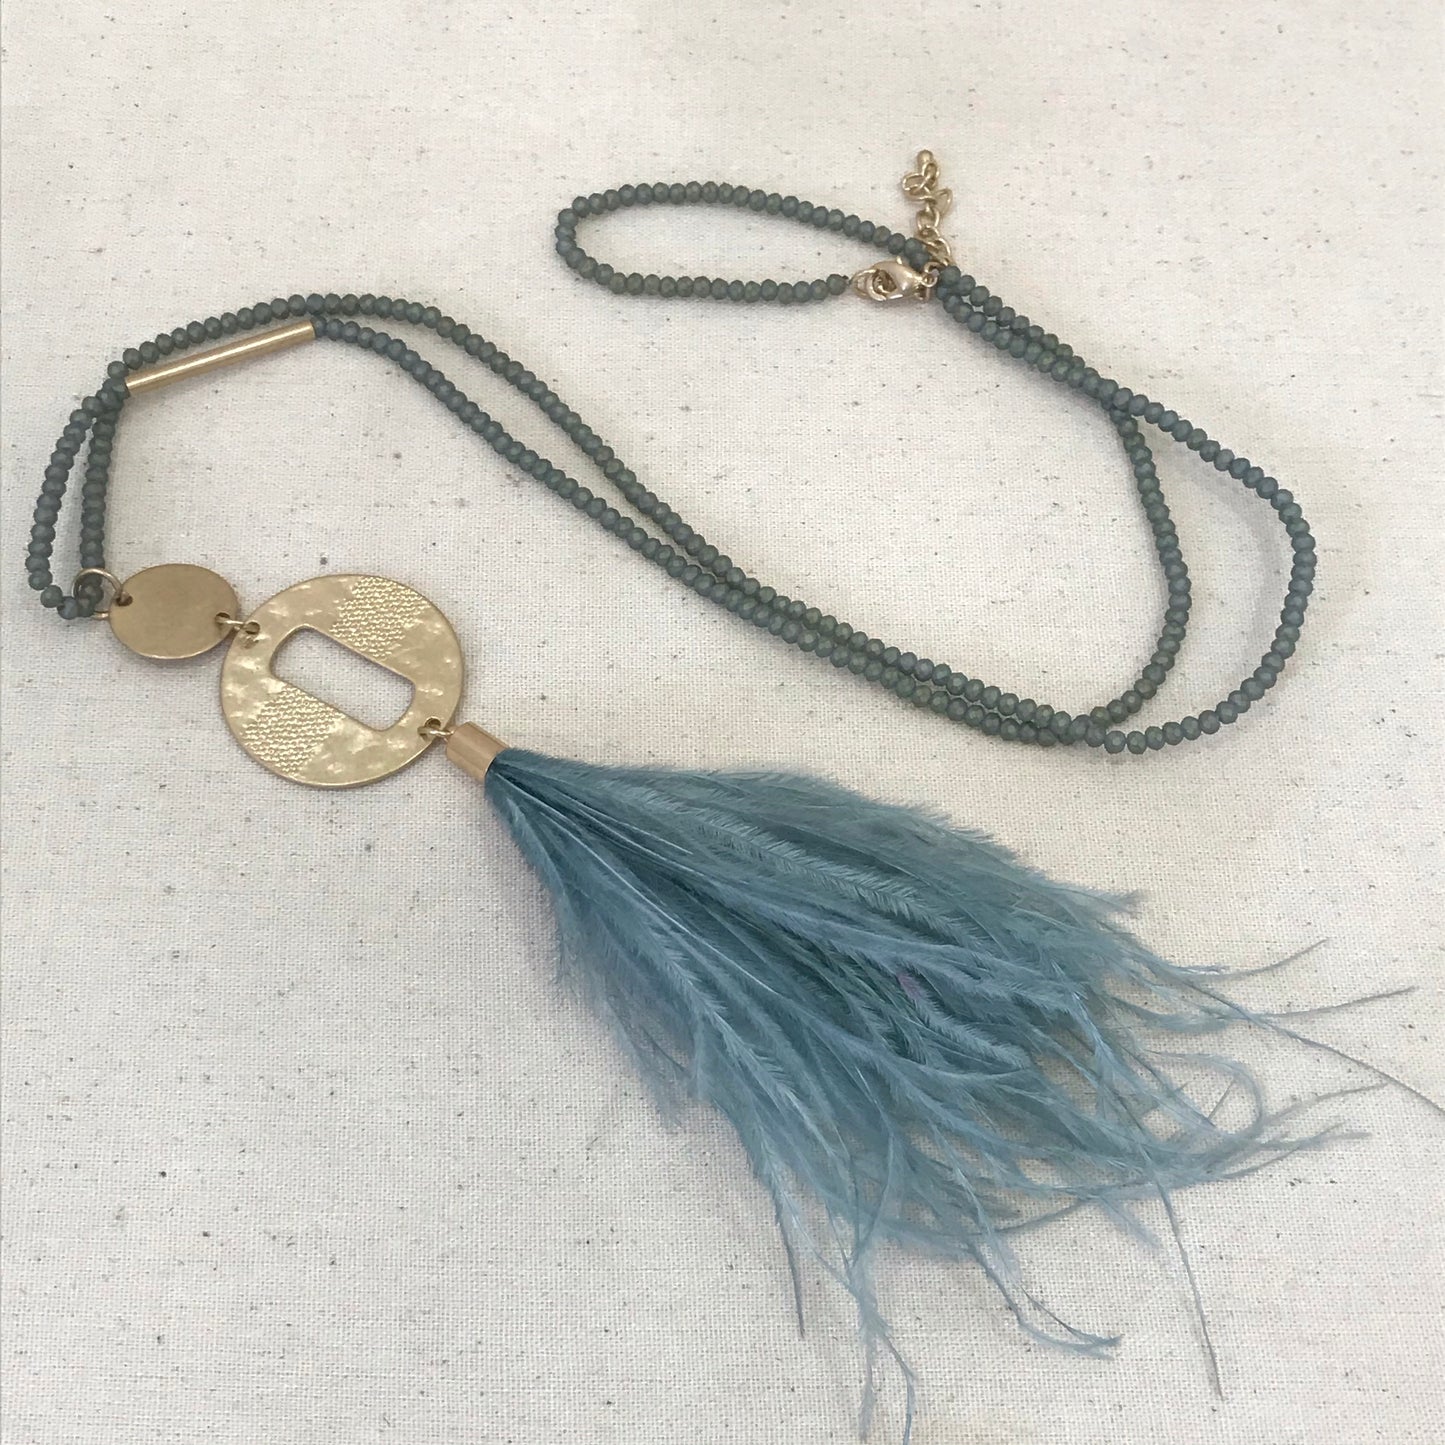 Turquoise feather beaded necklace